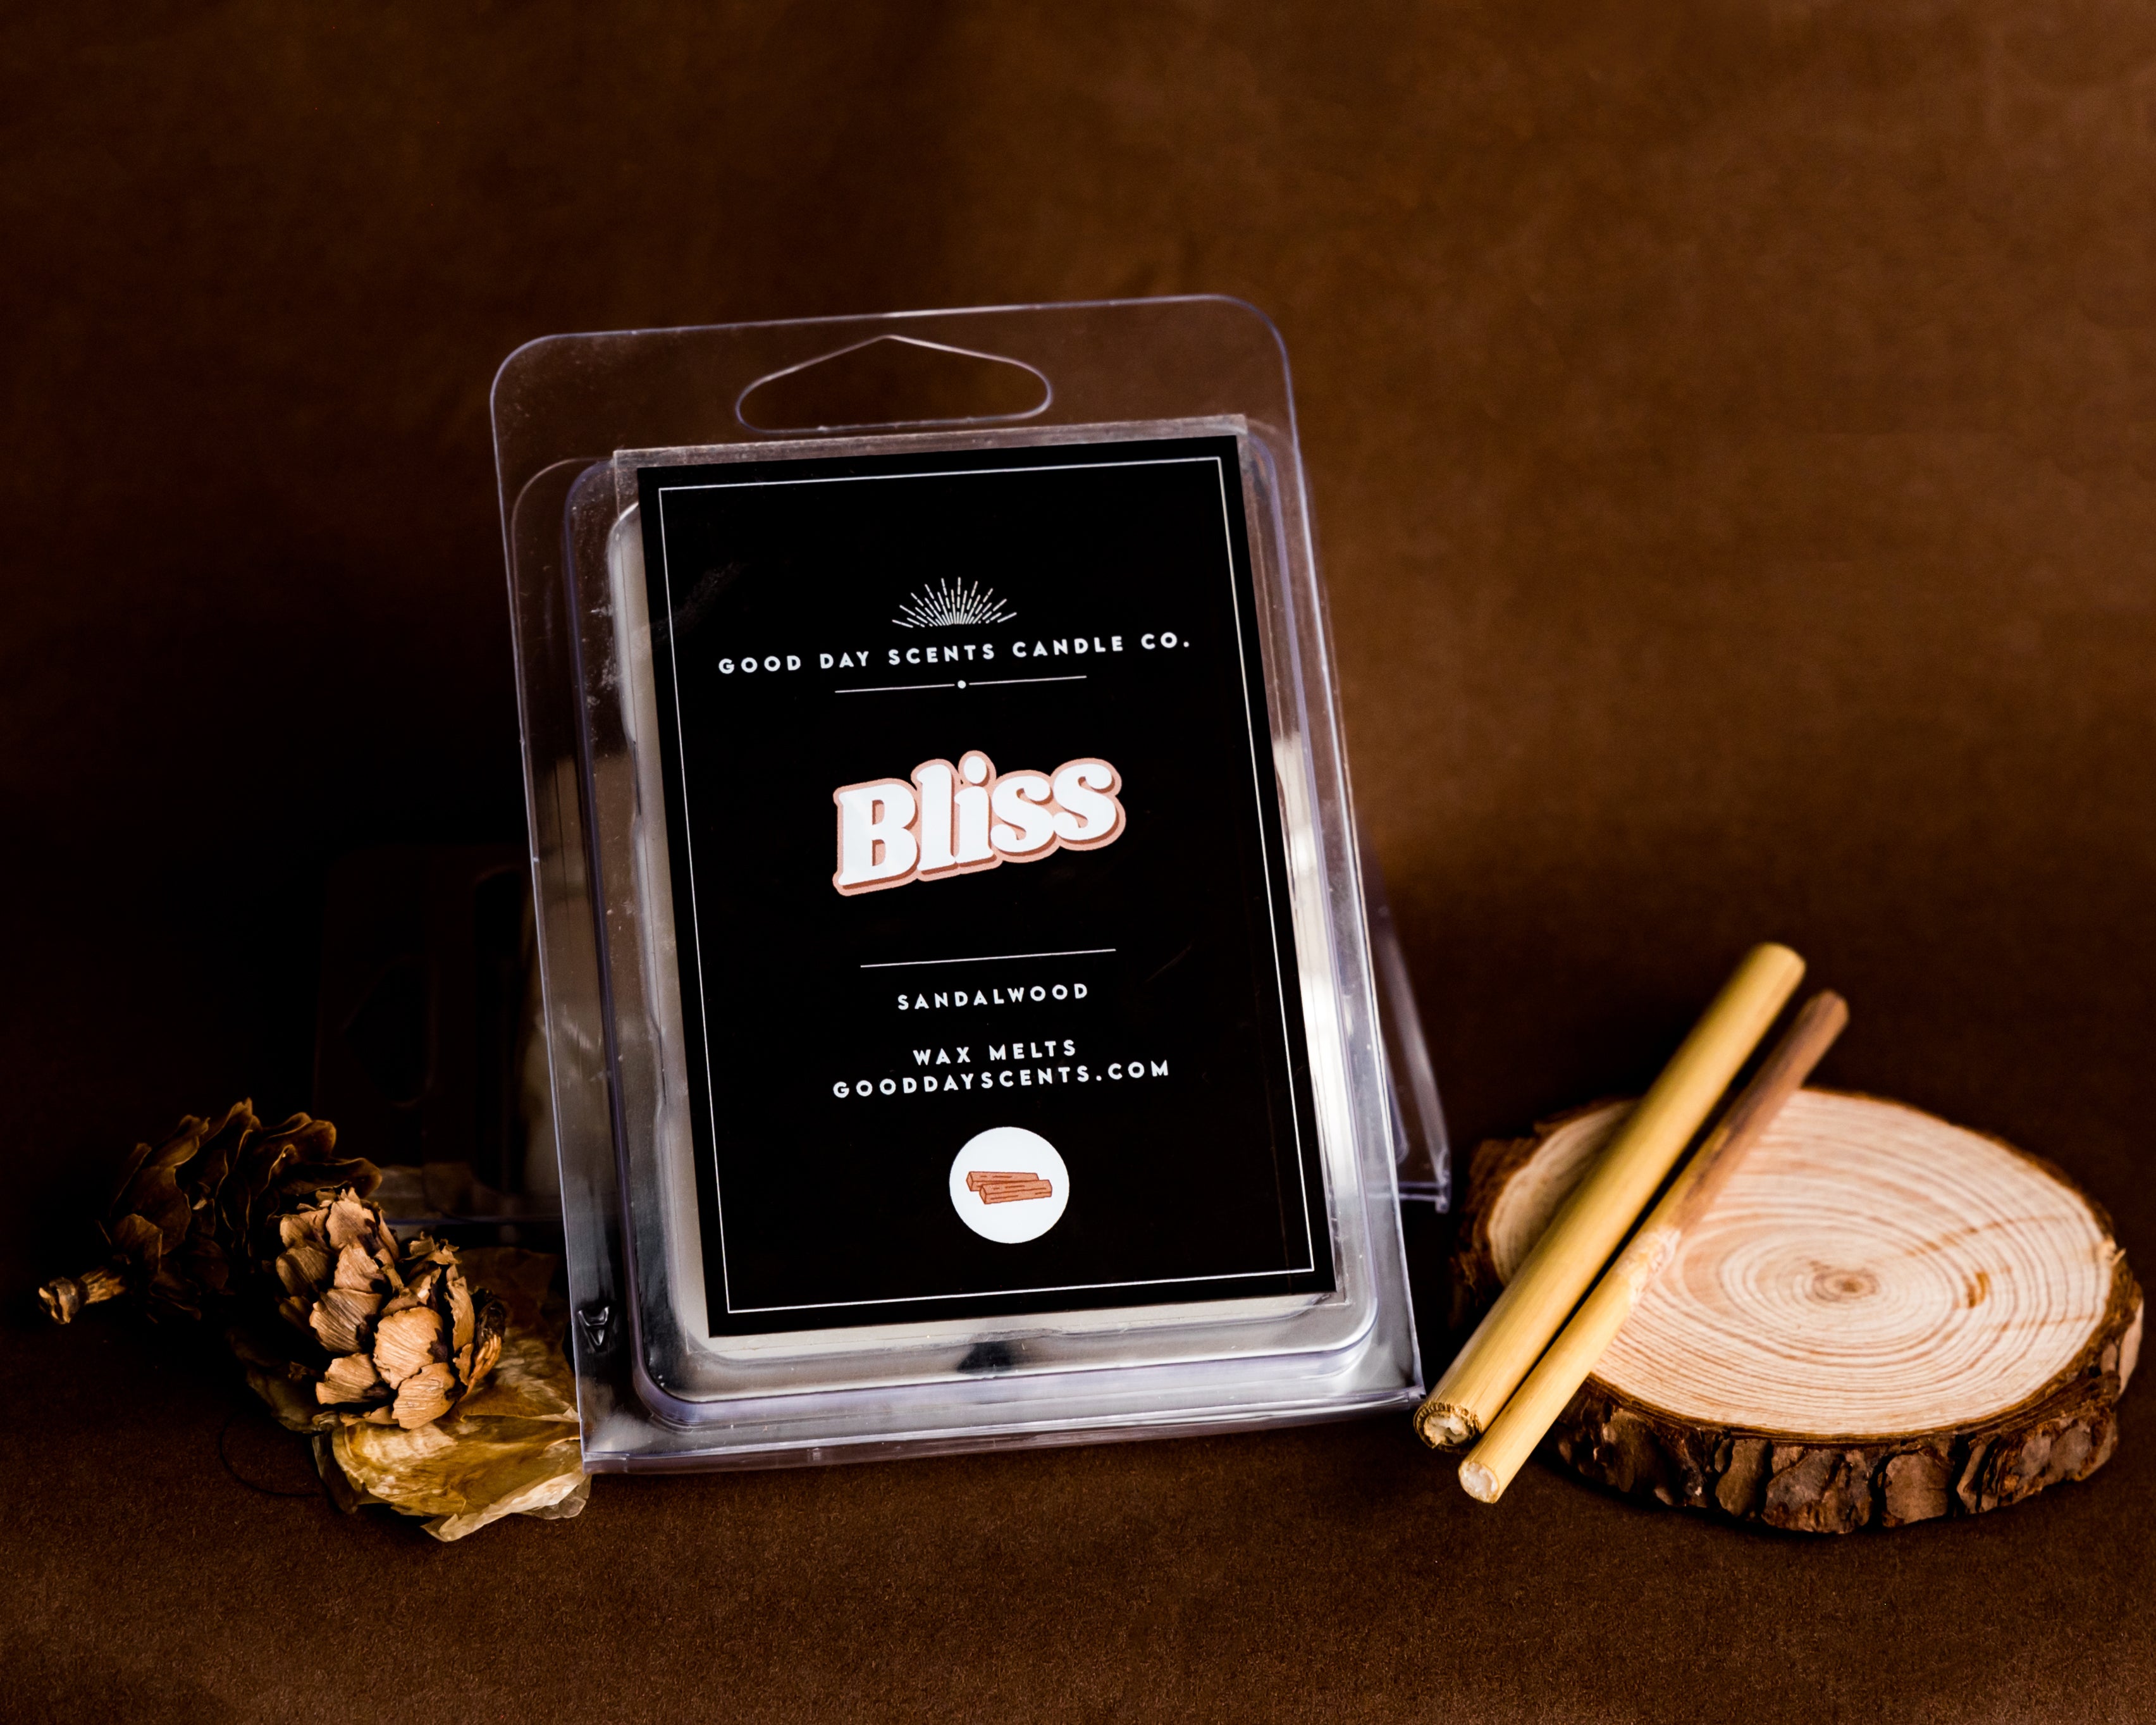 BLISS WAX MELTS – Good Day Scents